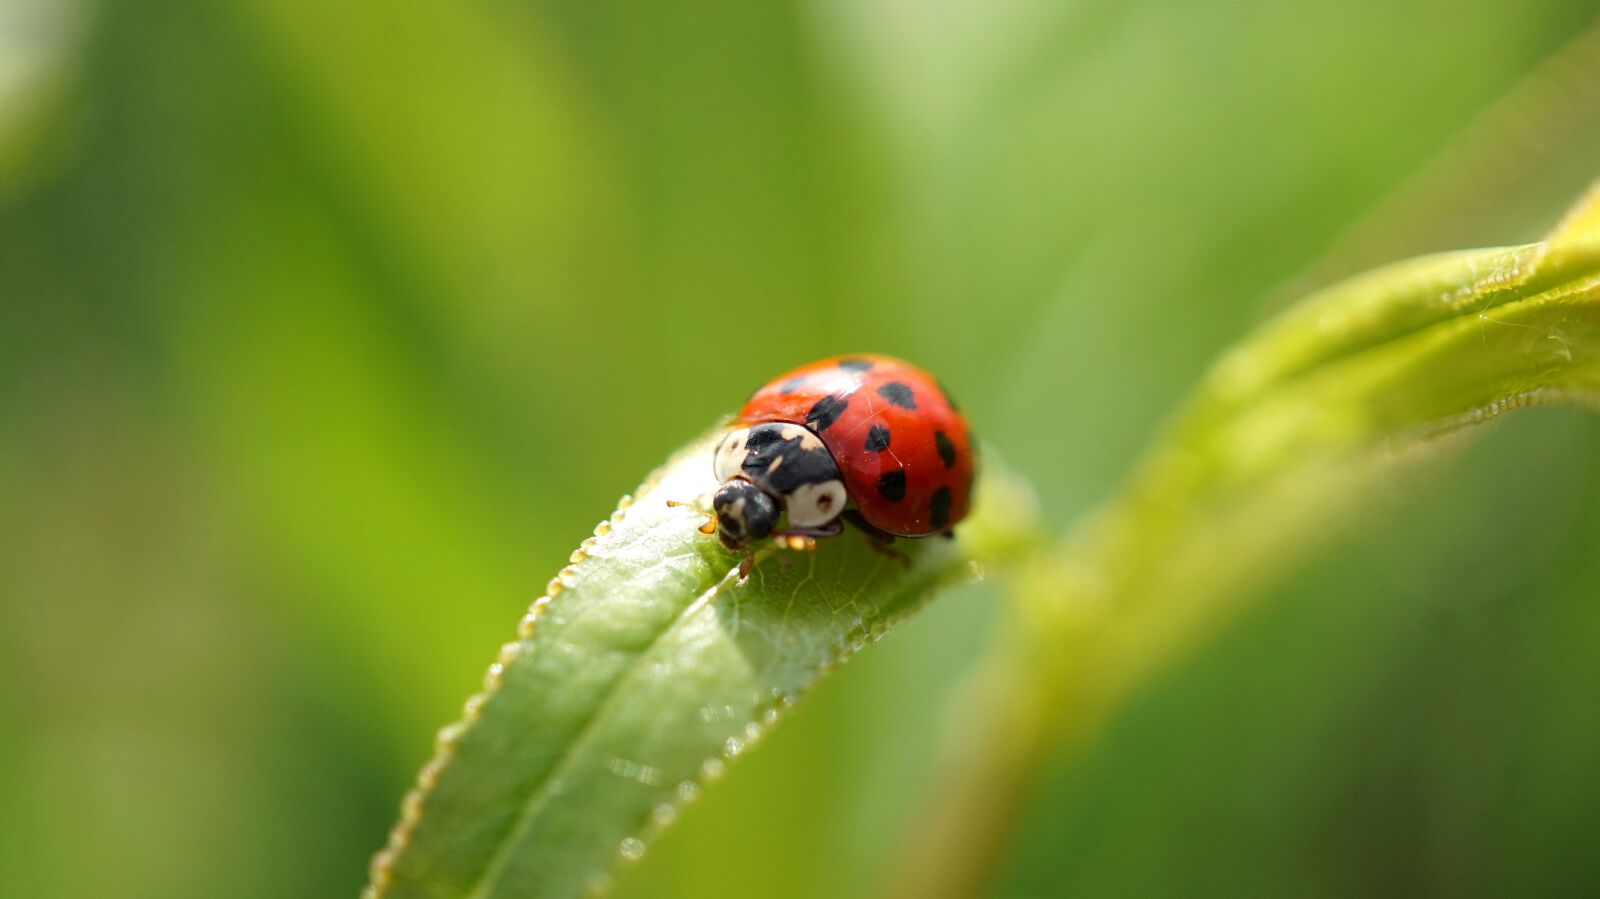 Sony Alpha a5000 (ILCE 5000) sample photo. Insect, ladybug, nature photography